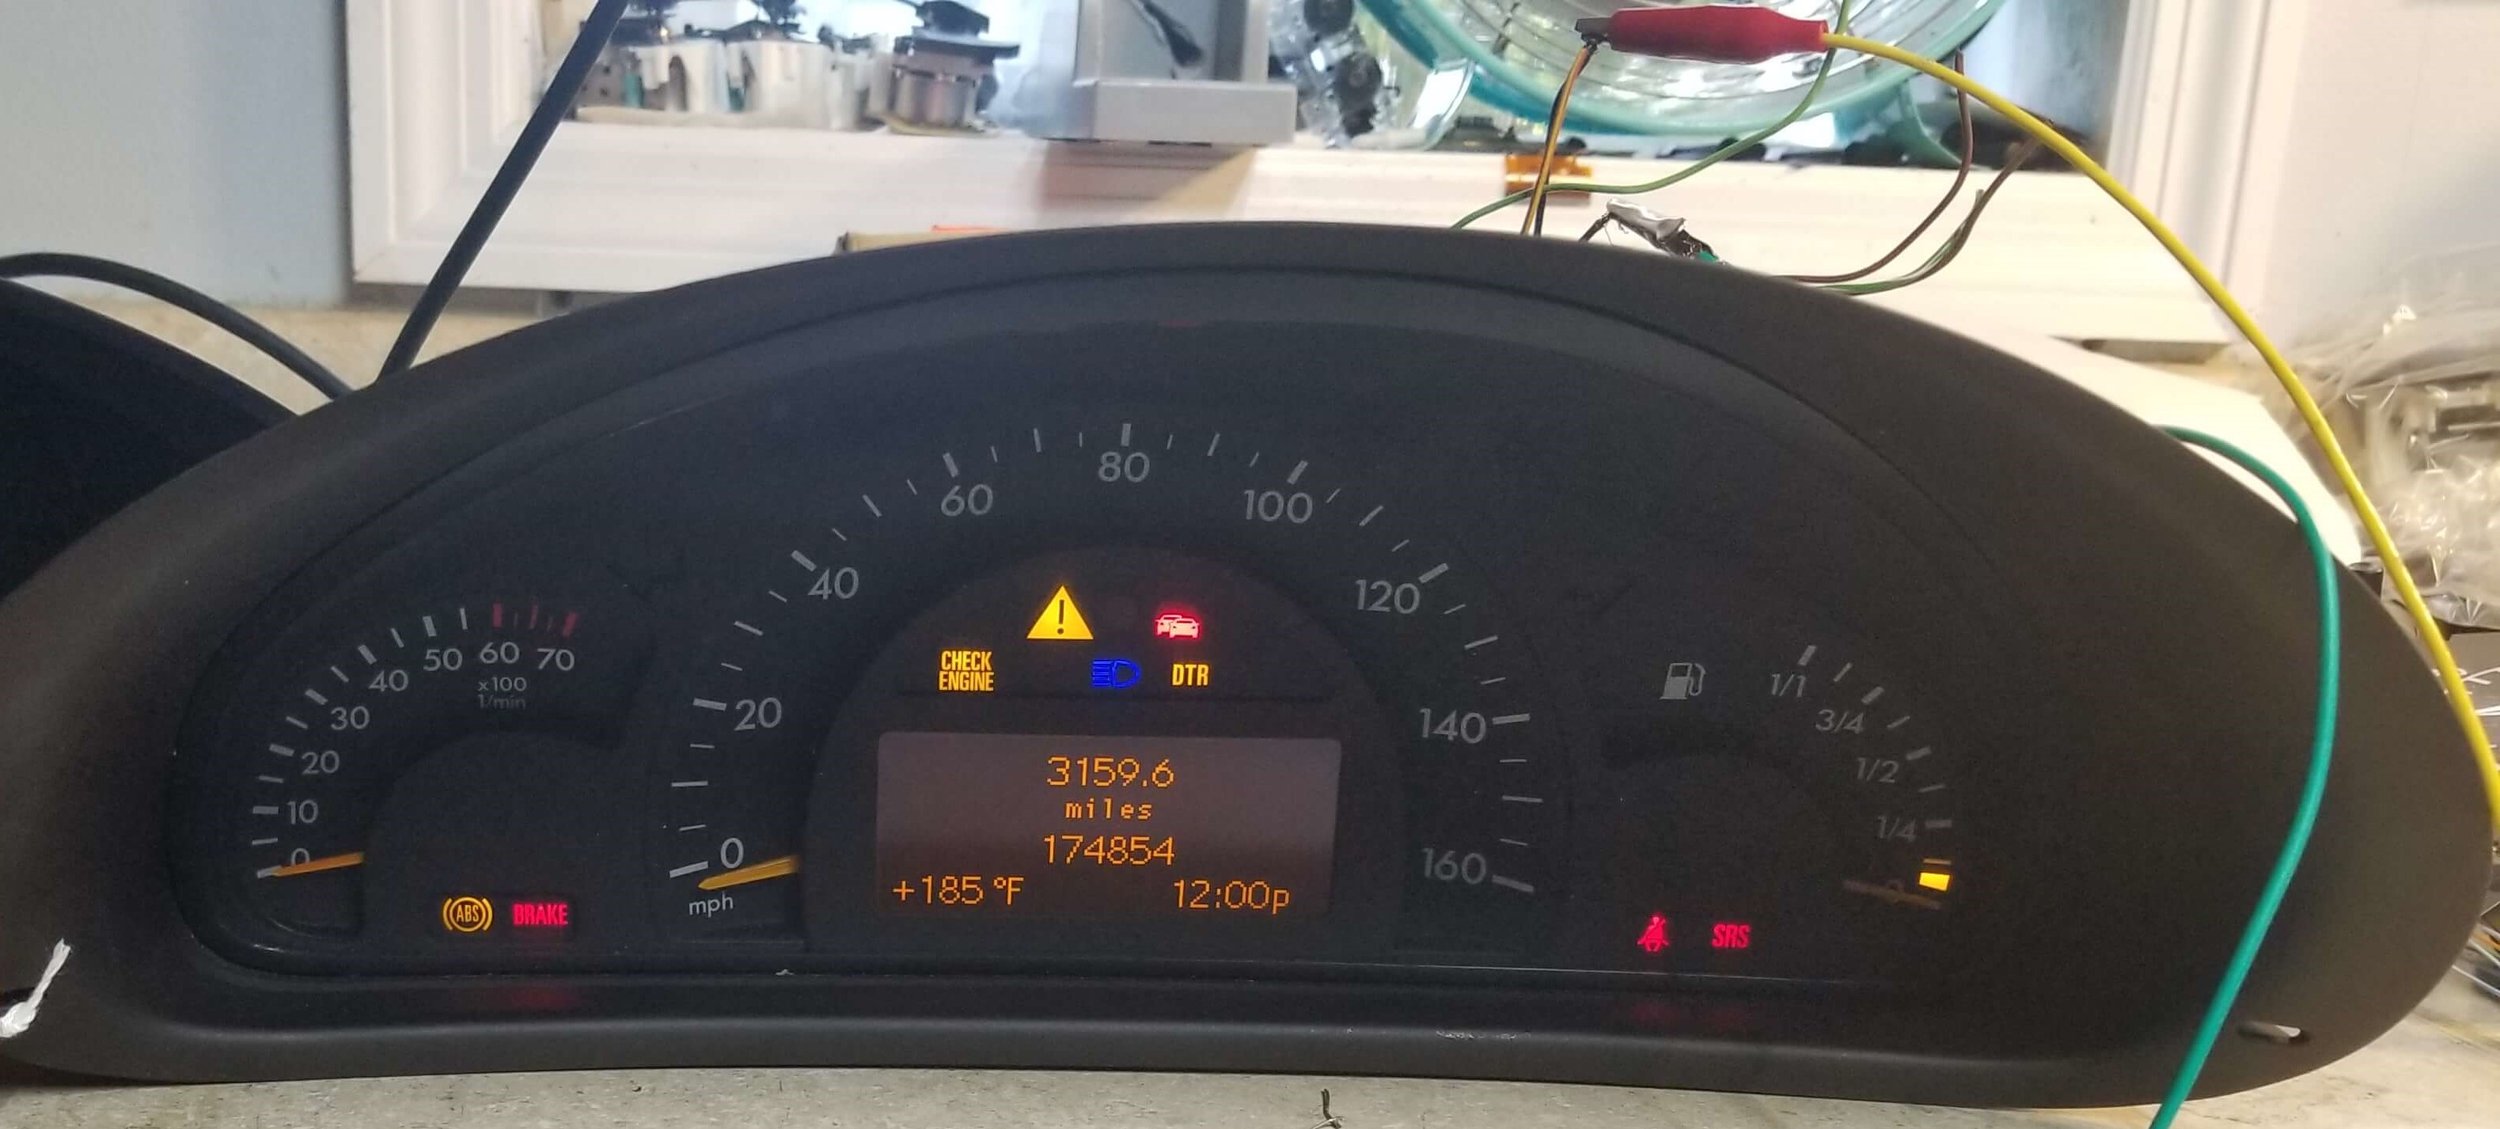 Mercedes C240 dead instrument cluster, LCD faded